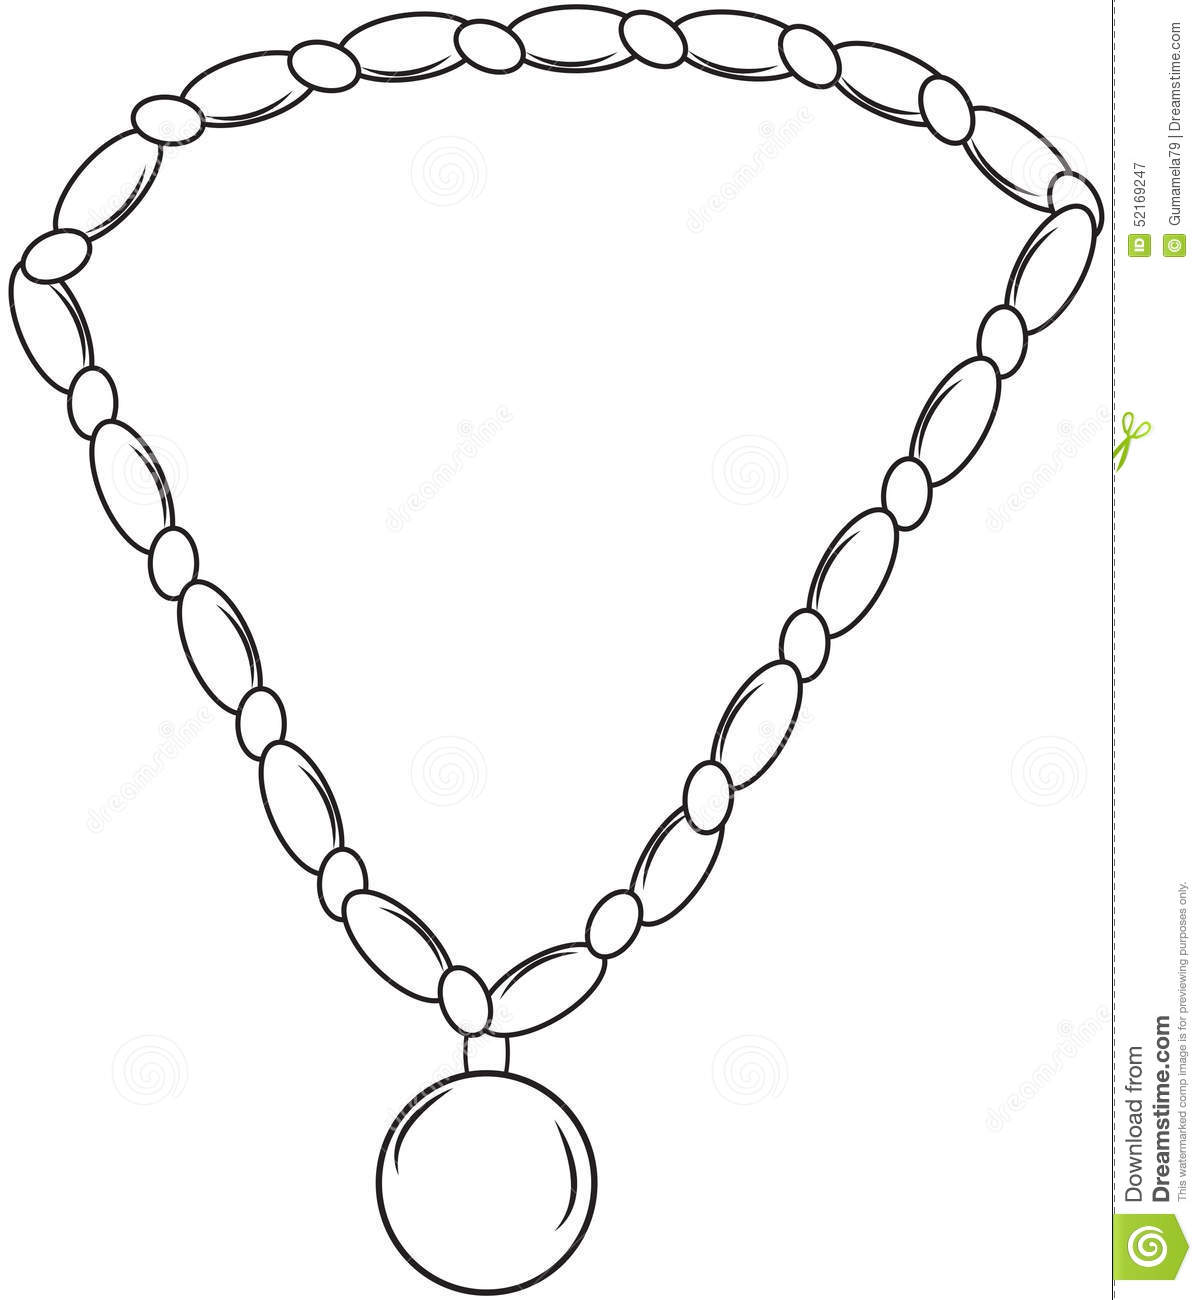 Download Necklace coloring for free - Designlooter 2020 👨‍🎨